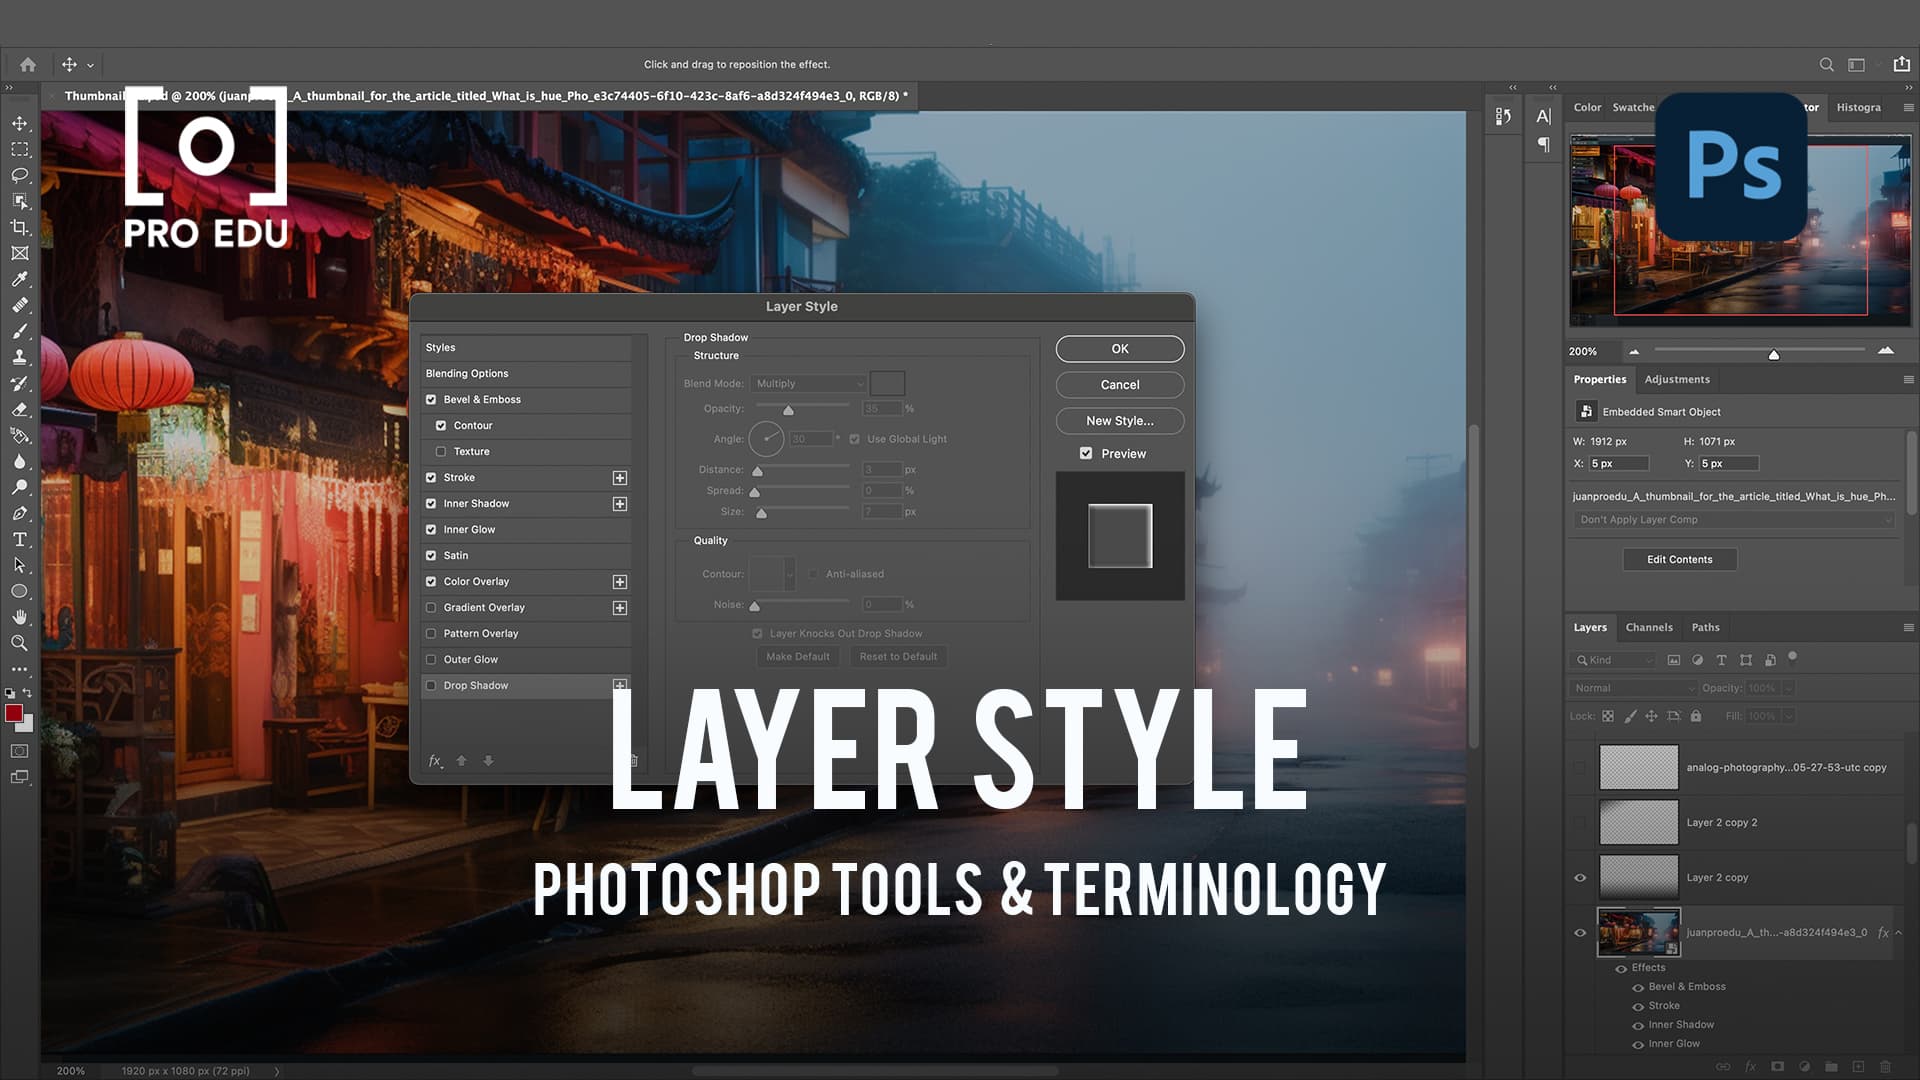 Layer Style Options in Photoshop - PRO EDU Guide